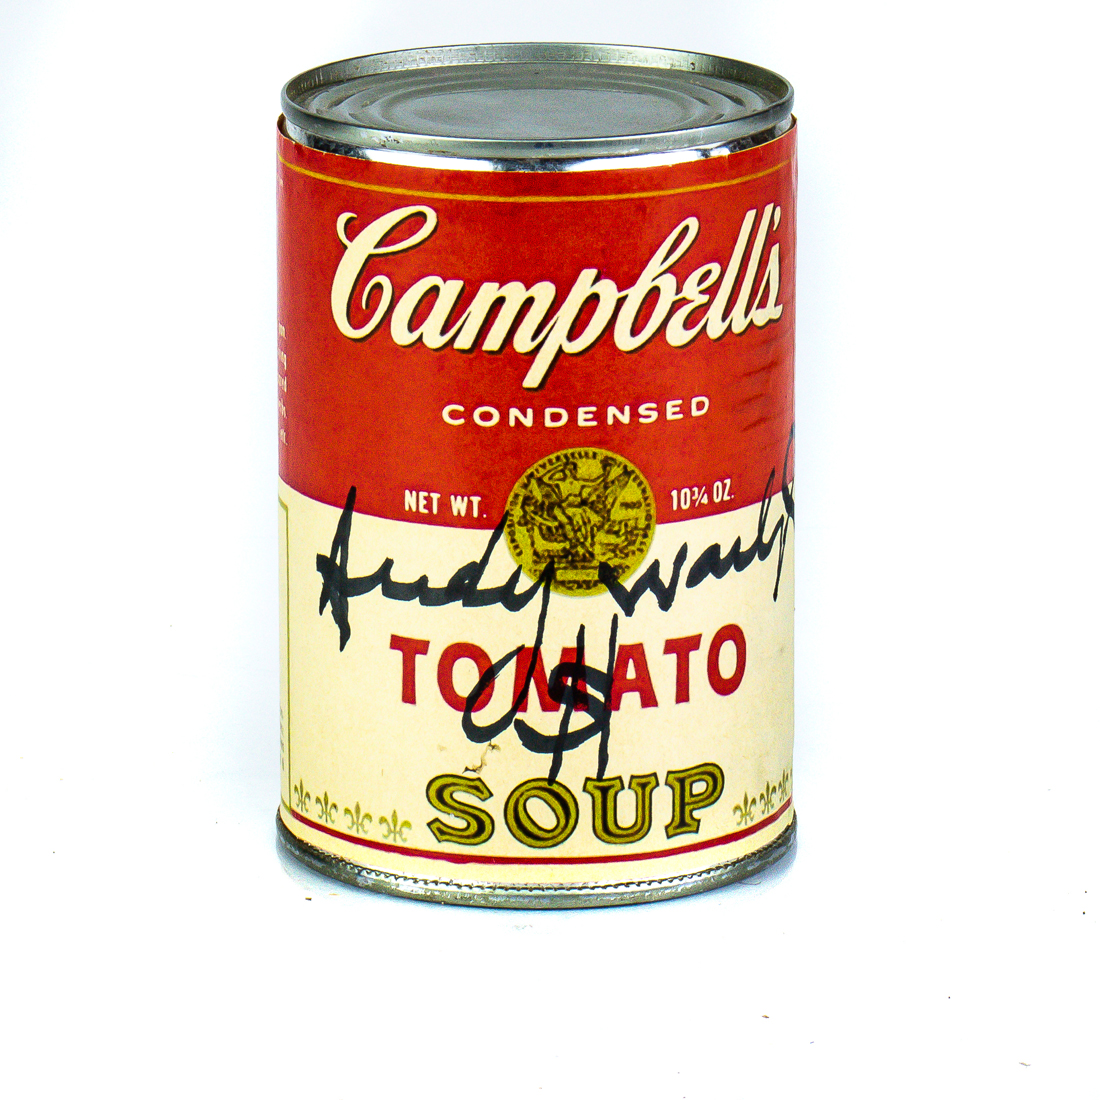 SOUP CAN ATTRIBUTED TO ANDY WARHOL 2d308e